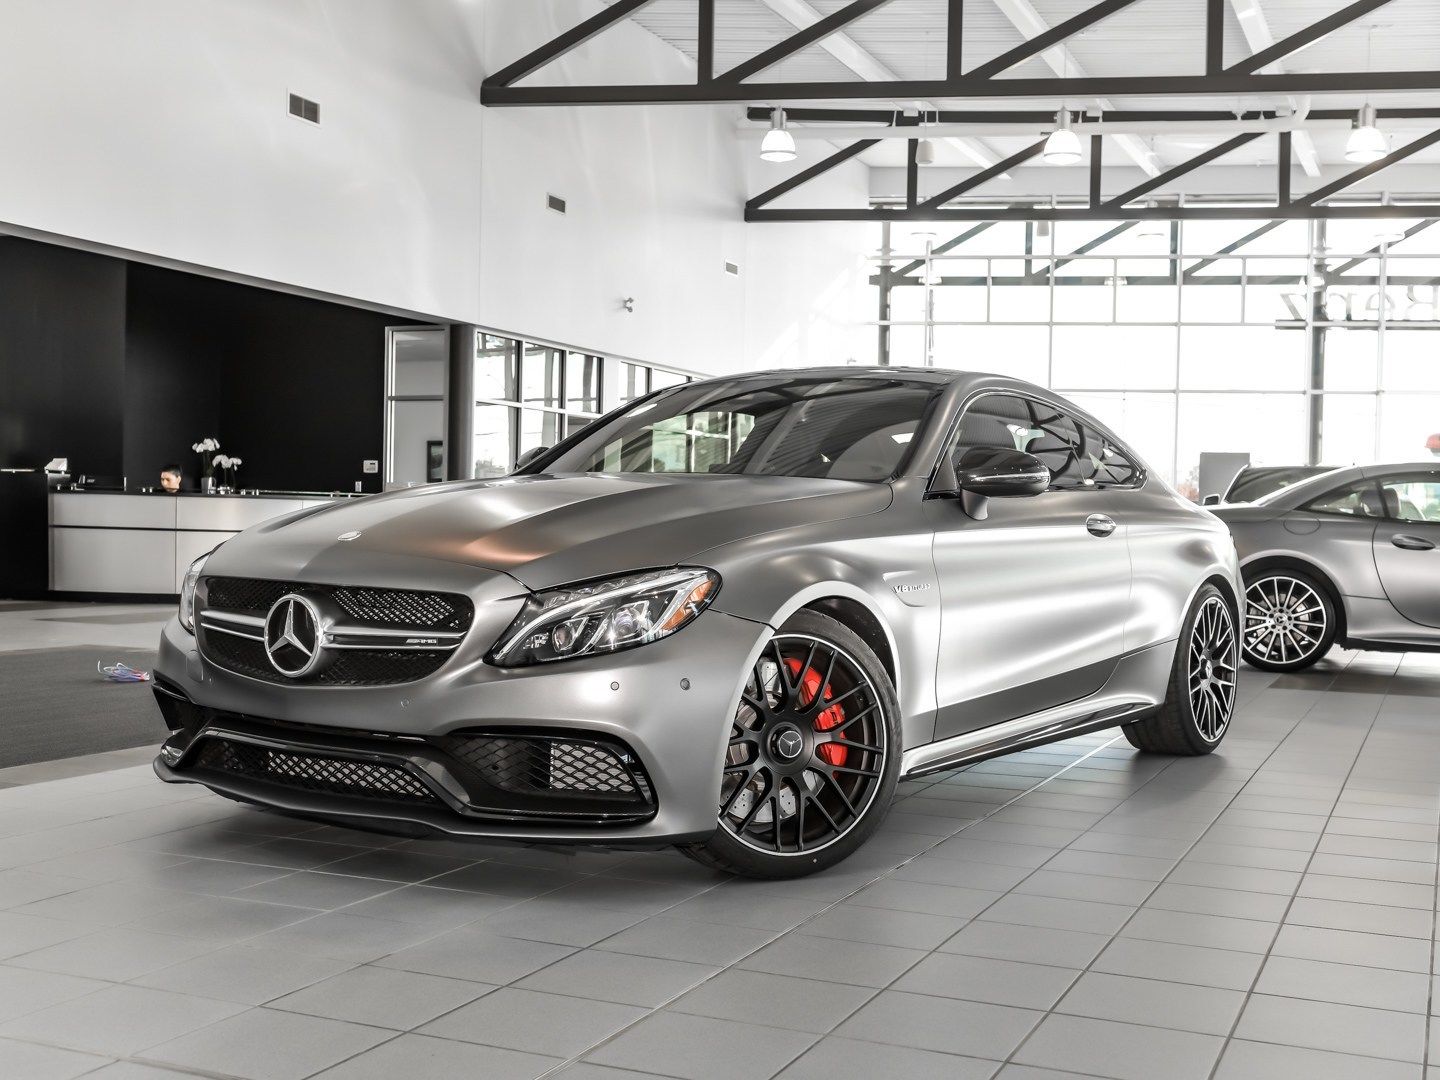 Pre Owned 17 Mercedes Benz C63 S Amg For Sale 8 0 Mercedes Benz Ottawa Downtown